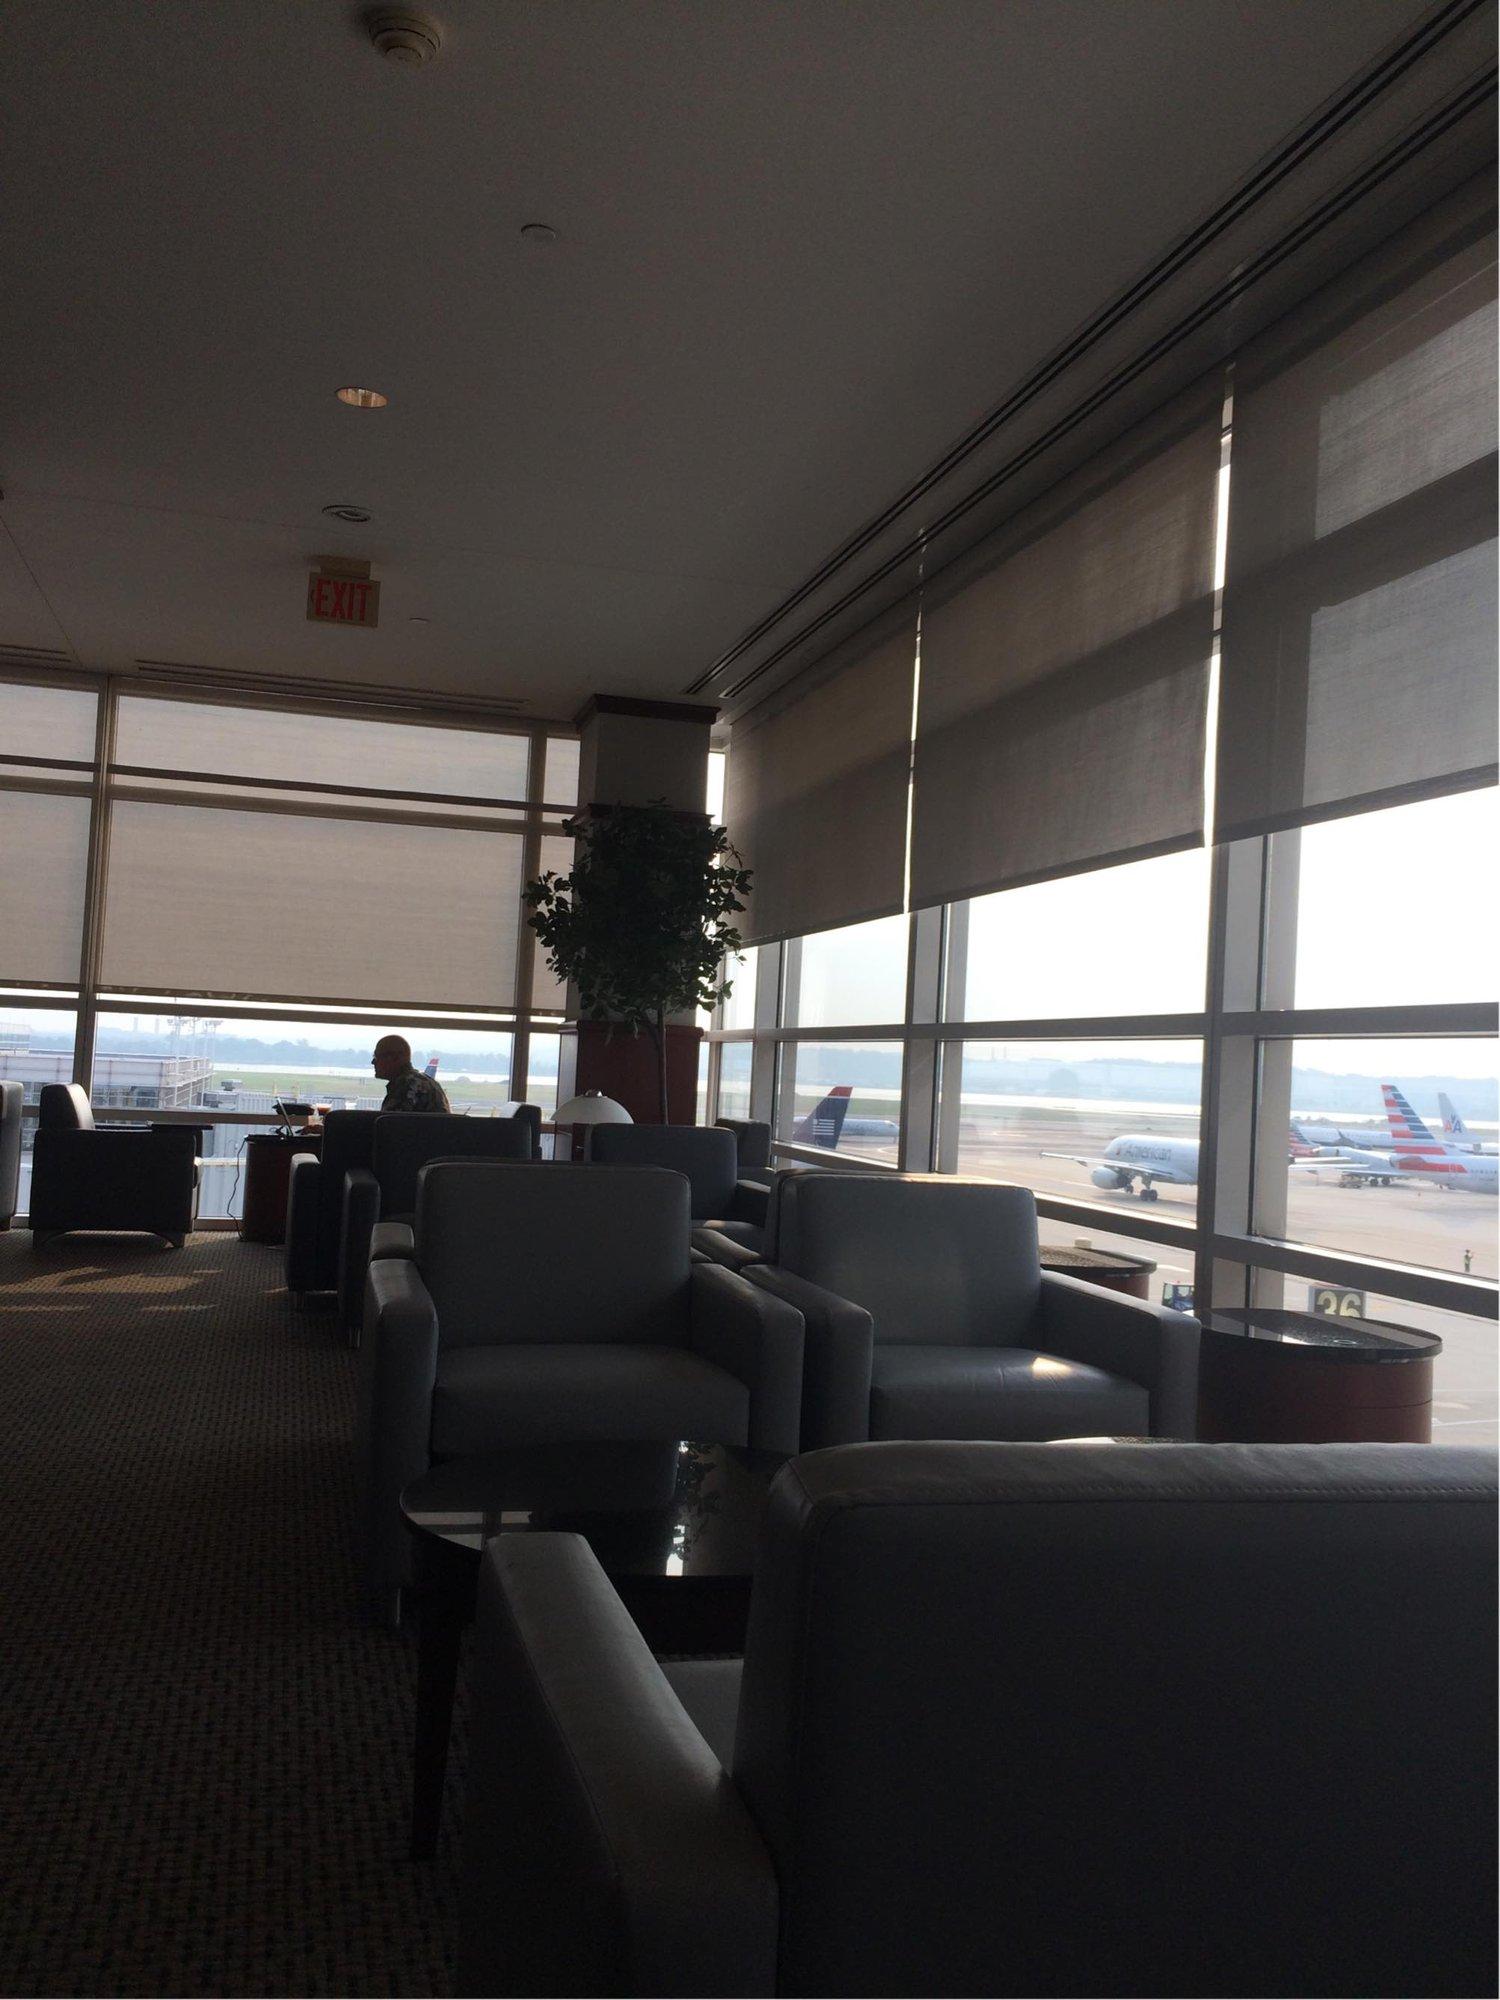 American Airlines Admirals Club image 4 of 19